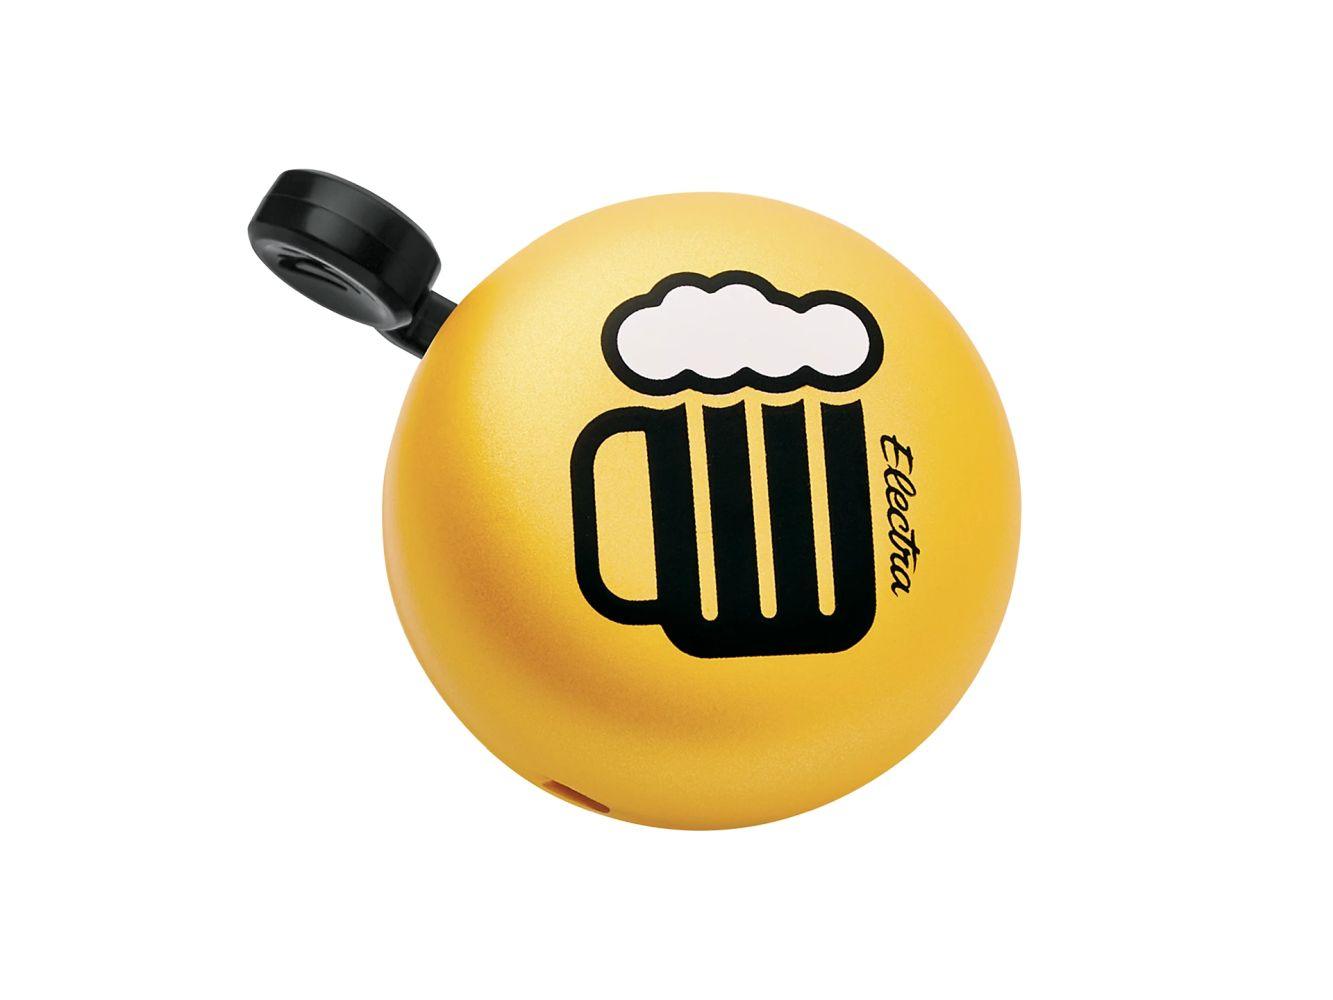 Electra Cheers Domed Ringer Bike Bell Cheers - Liquid-Life